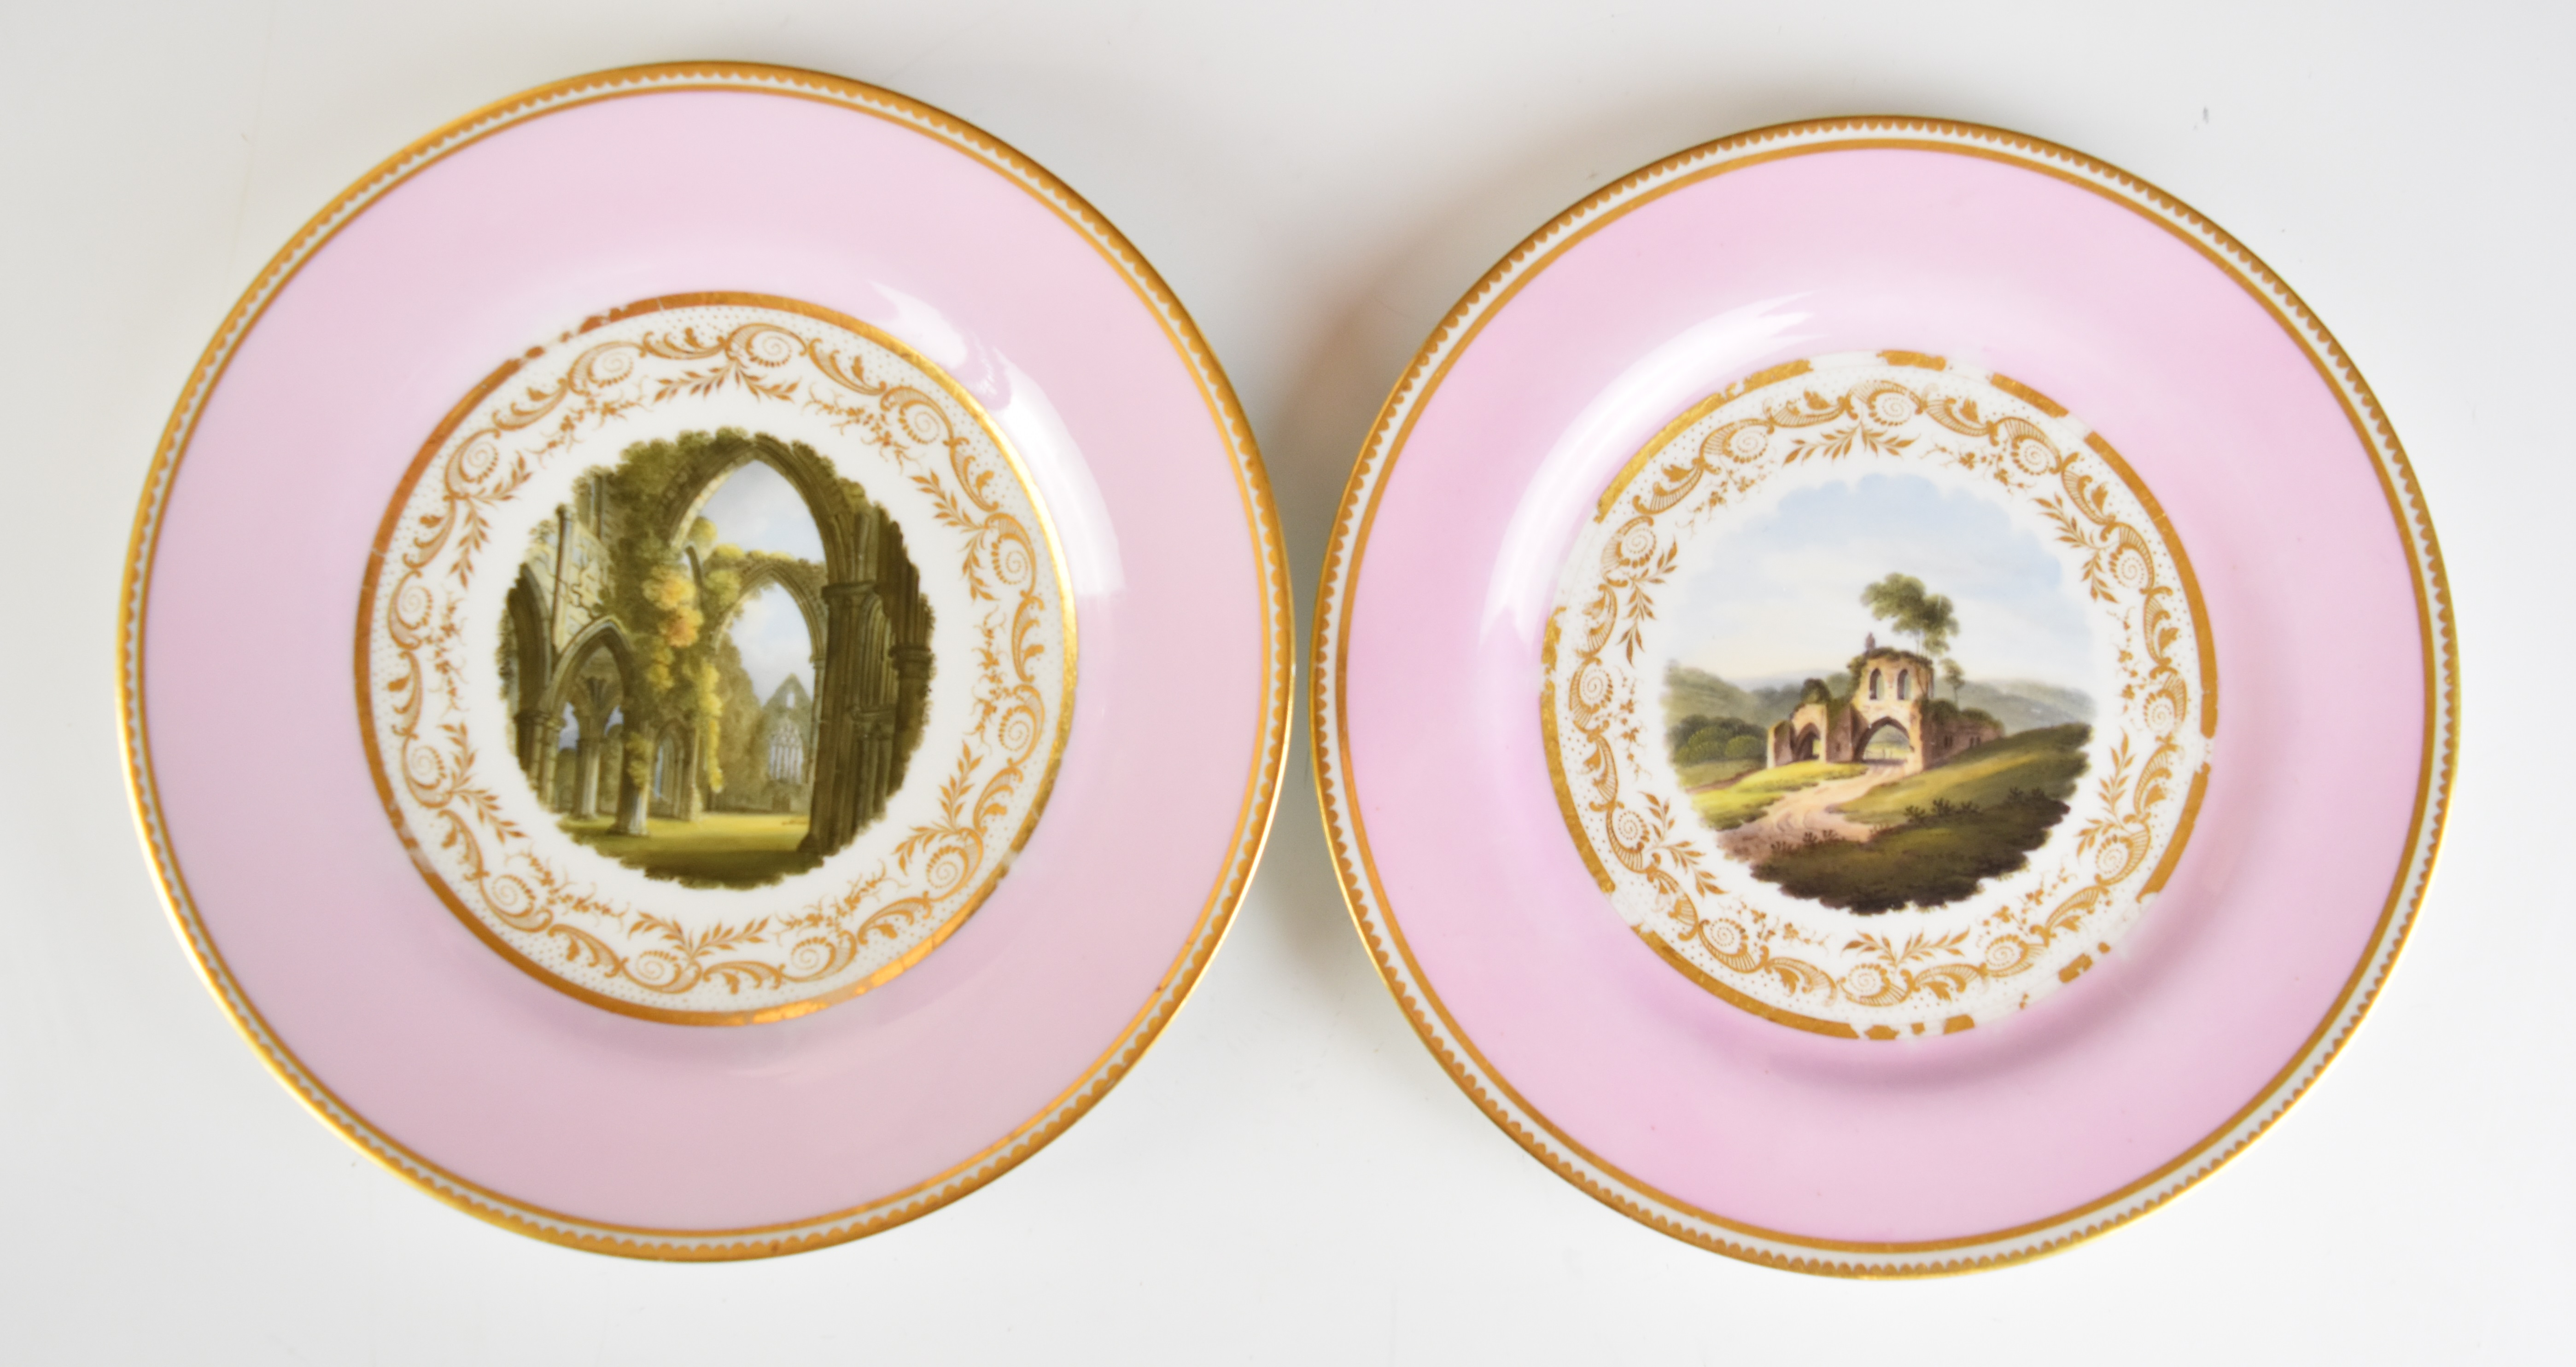 19thC cabinet plates and dishes including Copeland and Garrett, Yates, Flight Barr and Barr plates - Image 10 of 11